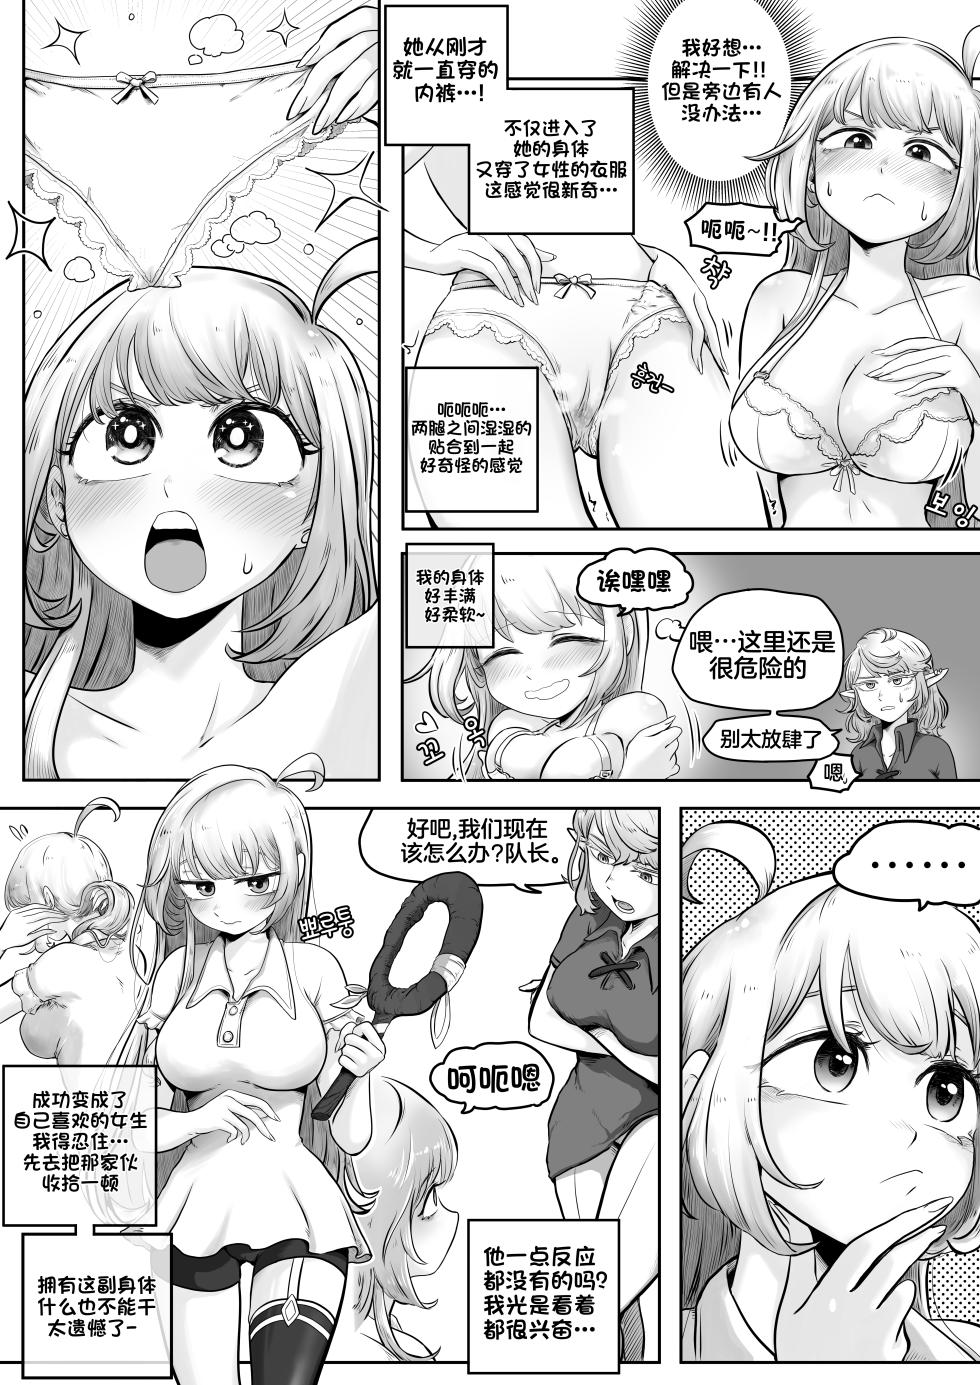 [Duckgu] Your Body Is Good [Chinese] [不咕鸟汉化组] - Page 14